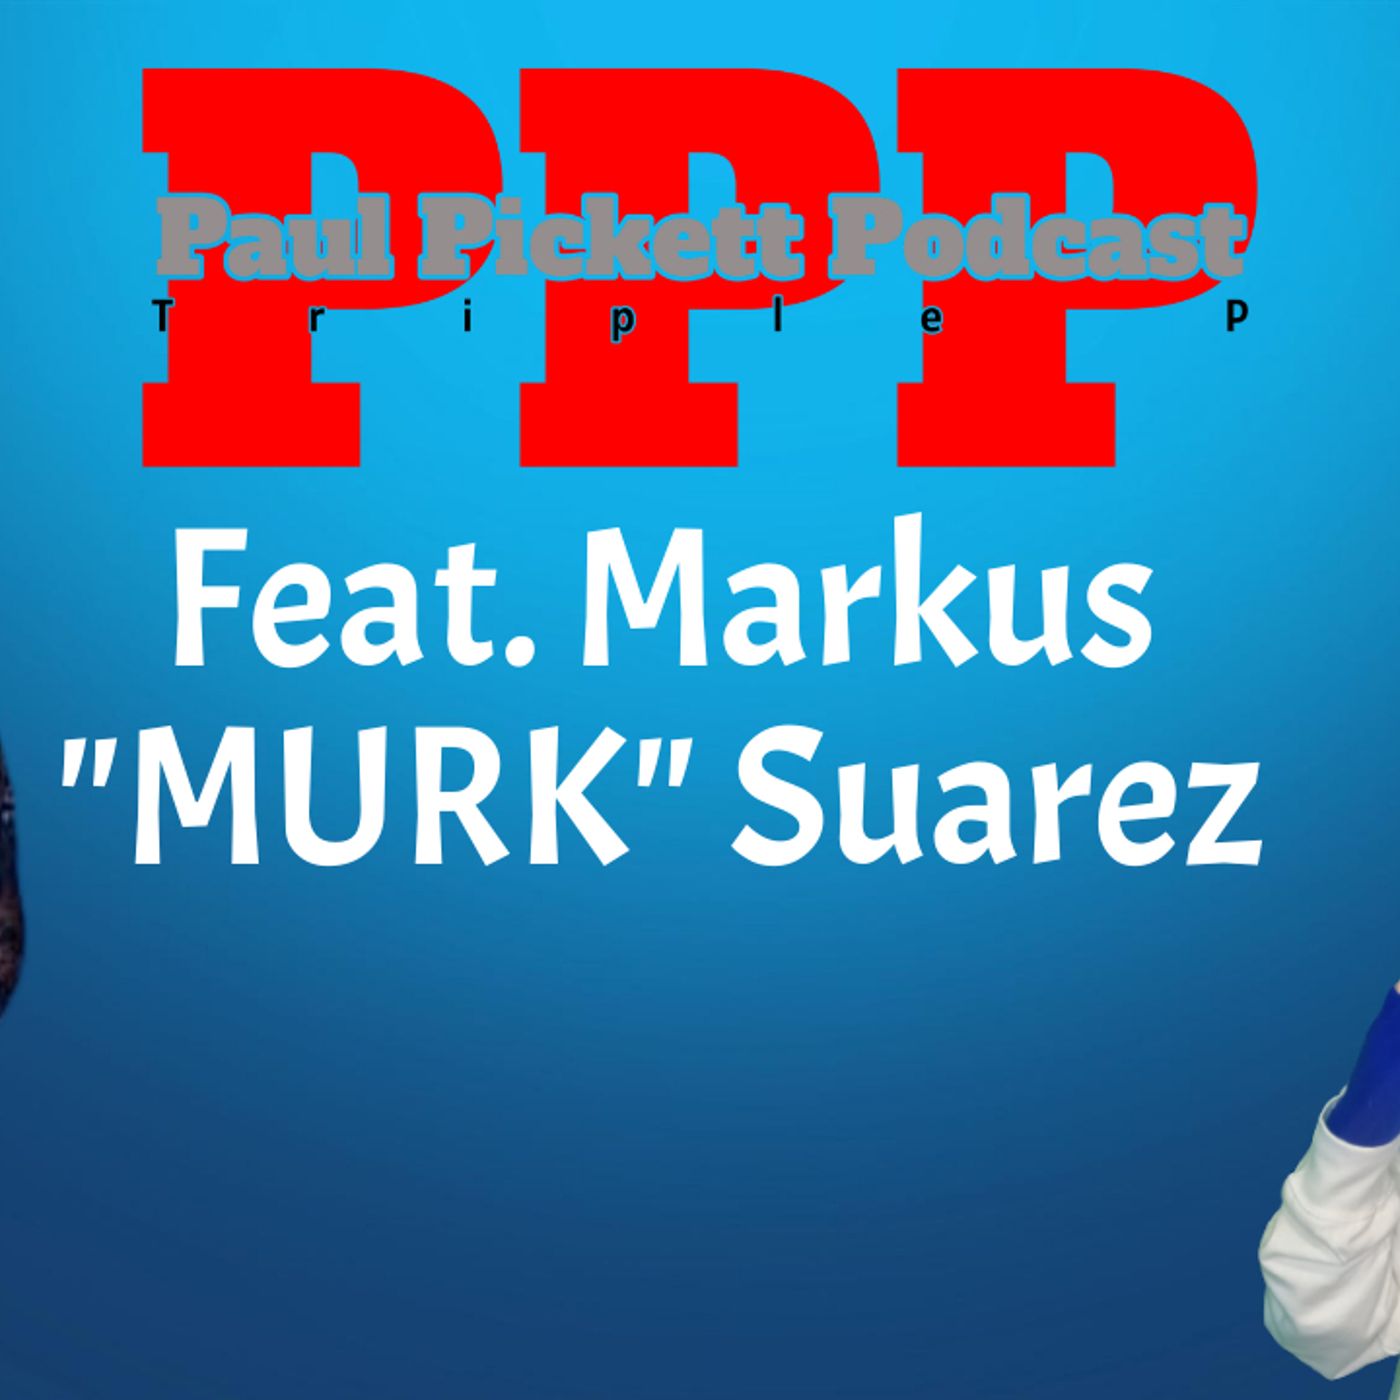 599: Markus "Murk"  Suarez Bare Knuckle Fighting, Transforming His Body and More